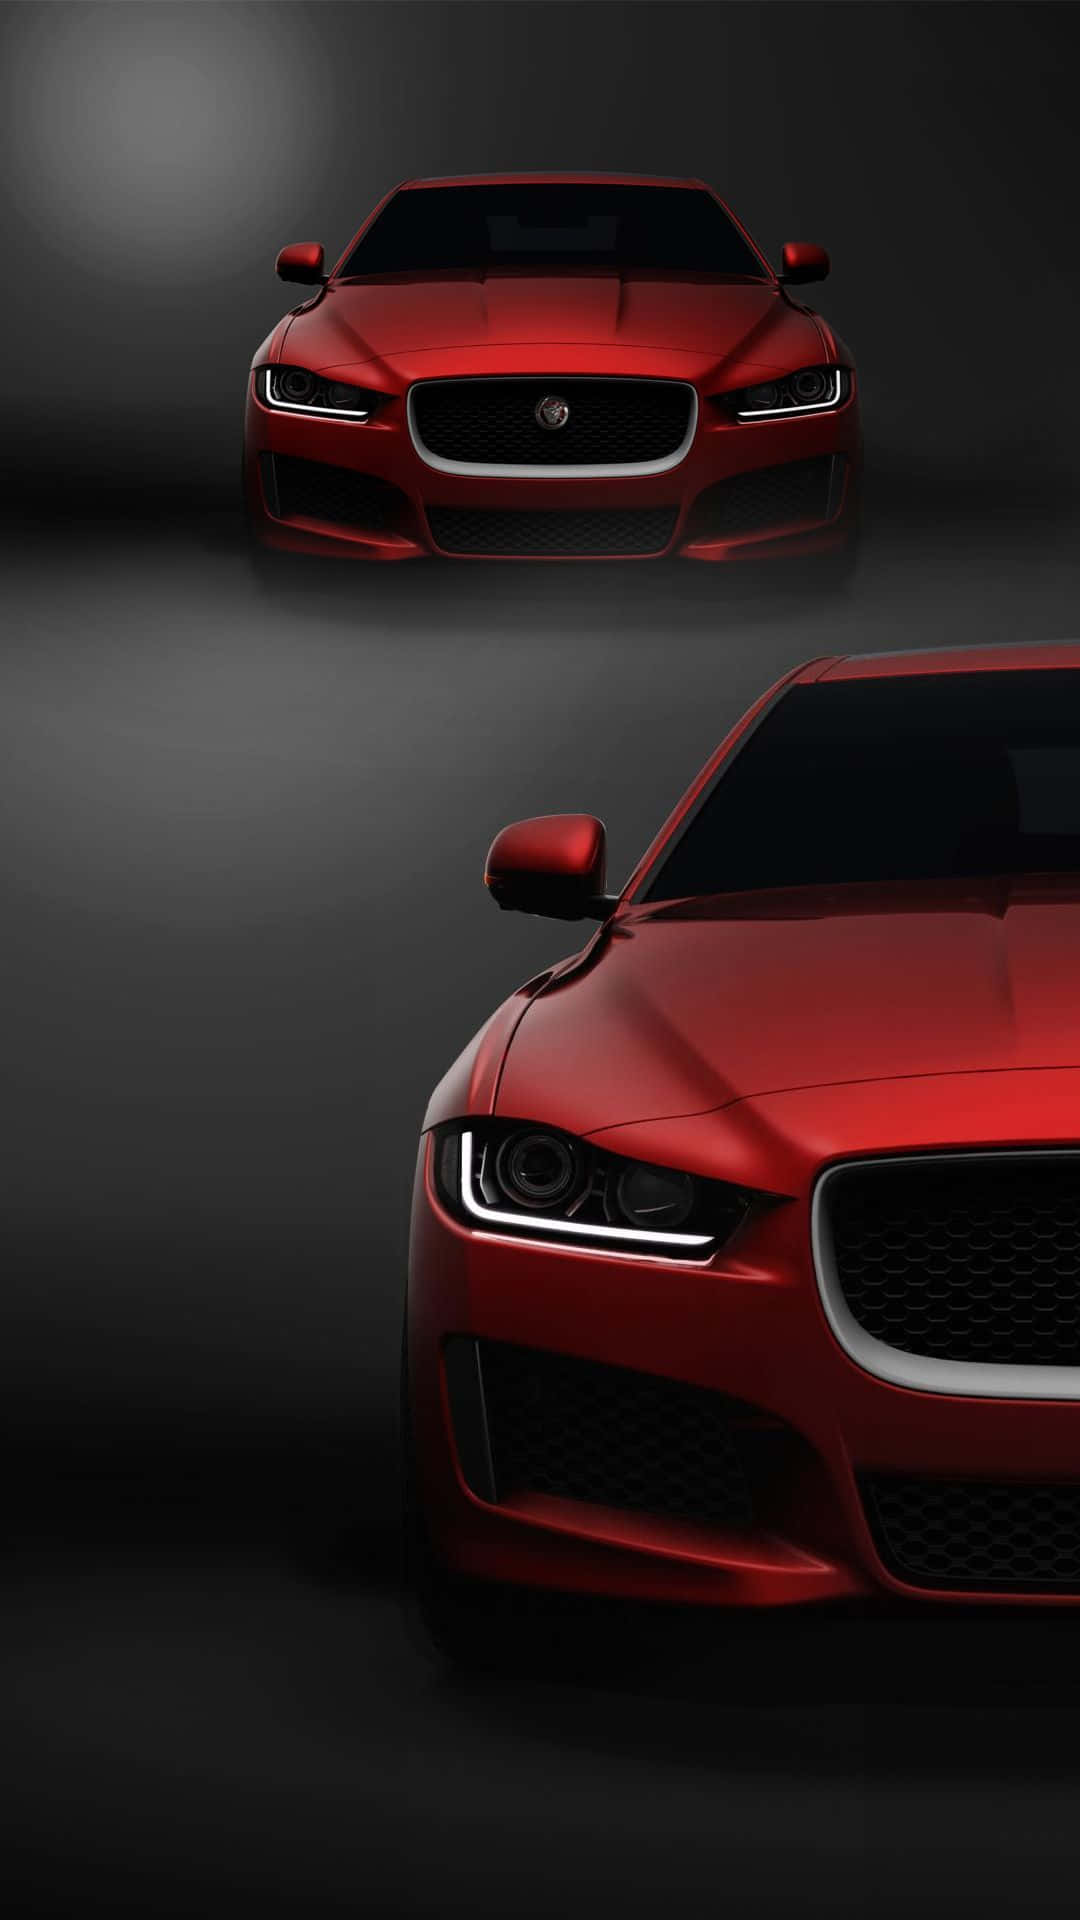 Roterjaguar Xf Auto Android Wallpaper